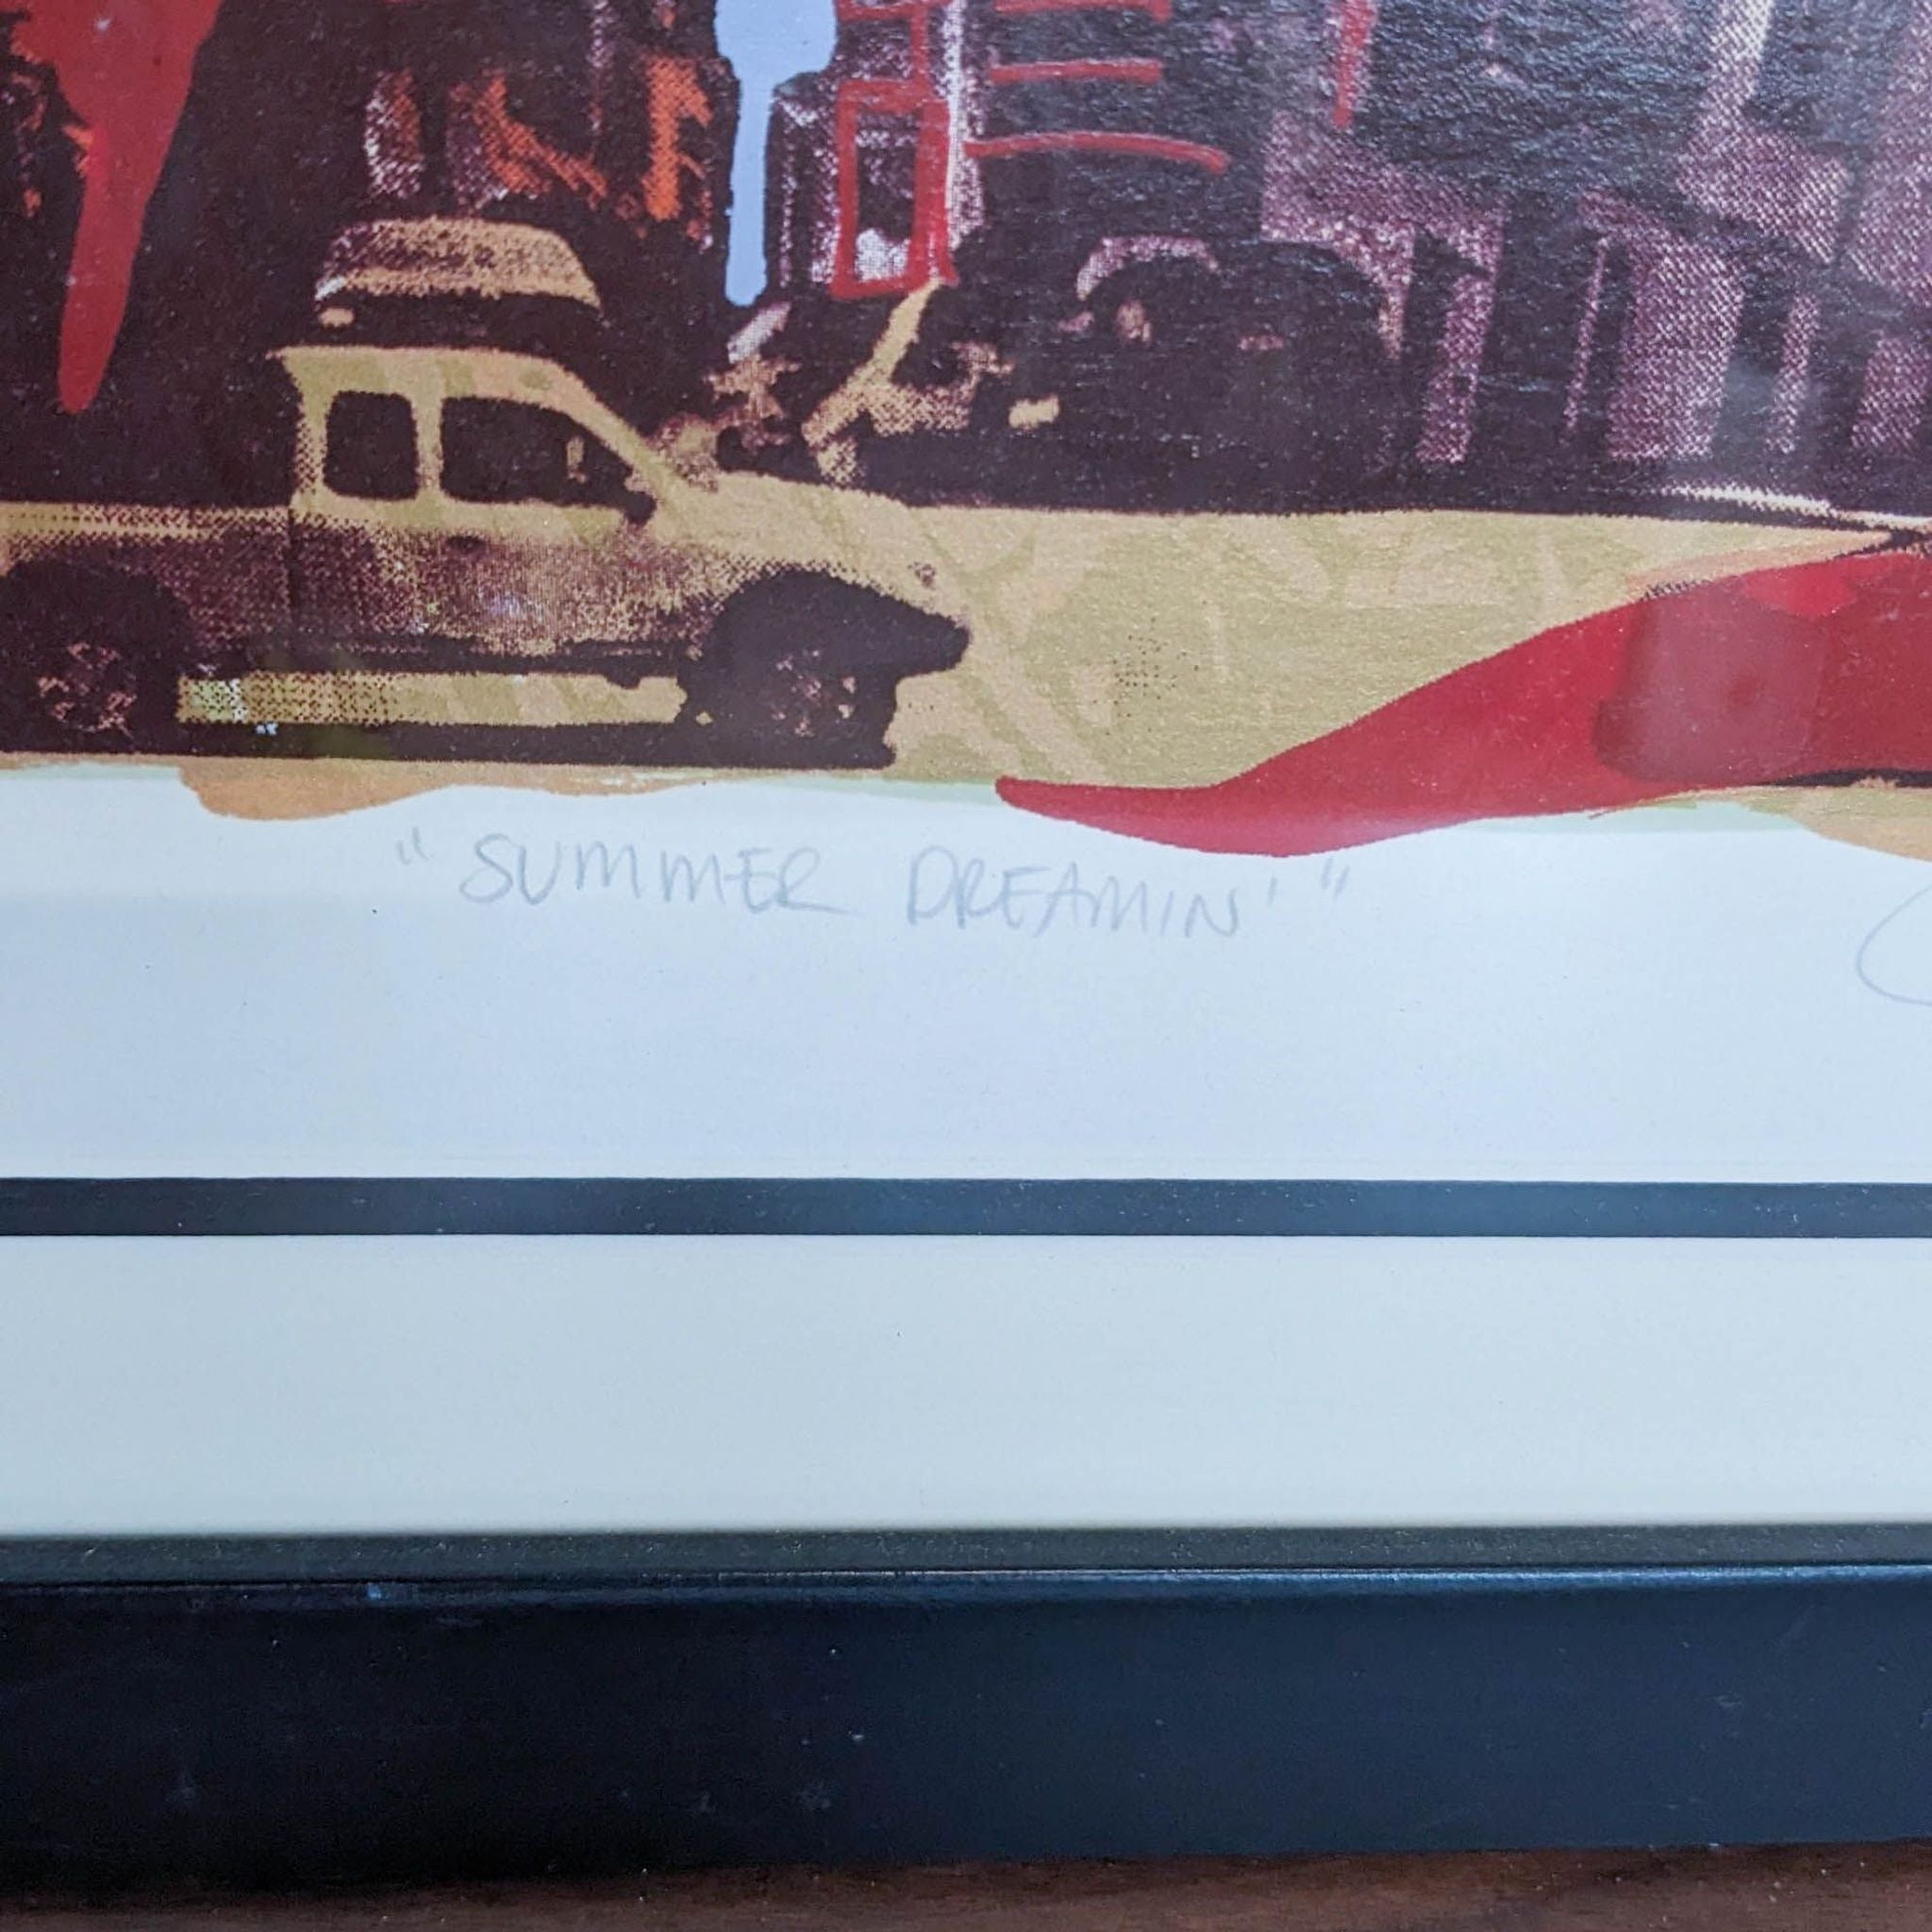 Hilary Williams brand "Summer Dreamin" screen print, featuring urban scenery, edition 41/50, artist-signed, displayed in black frame.